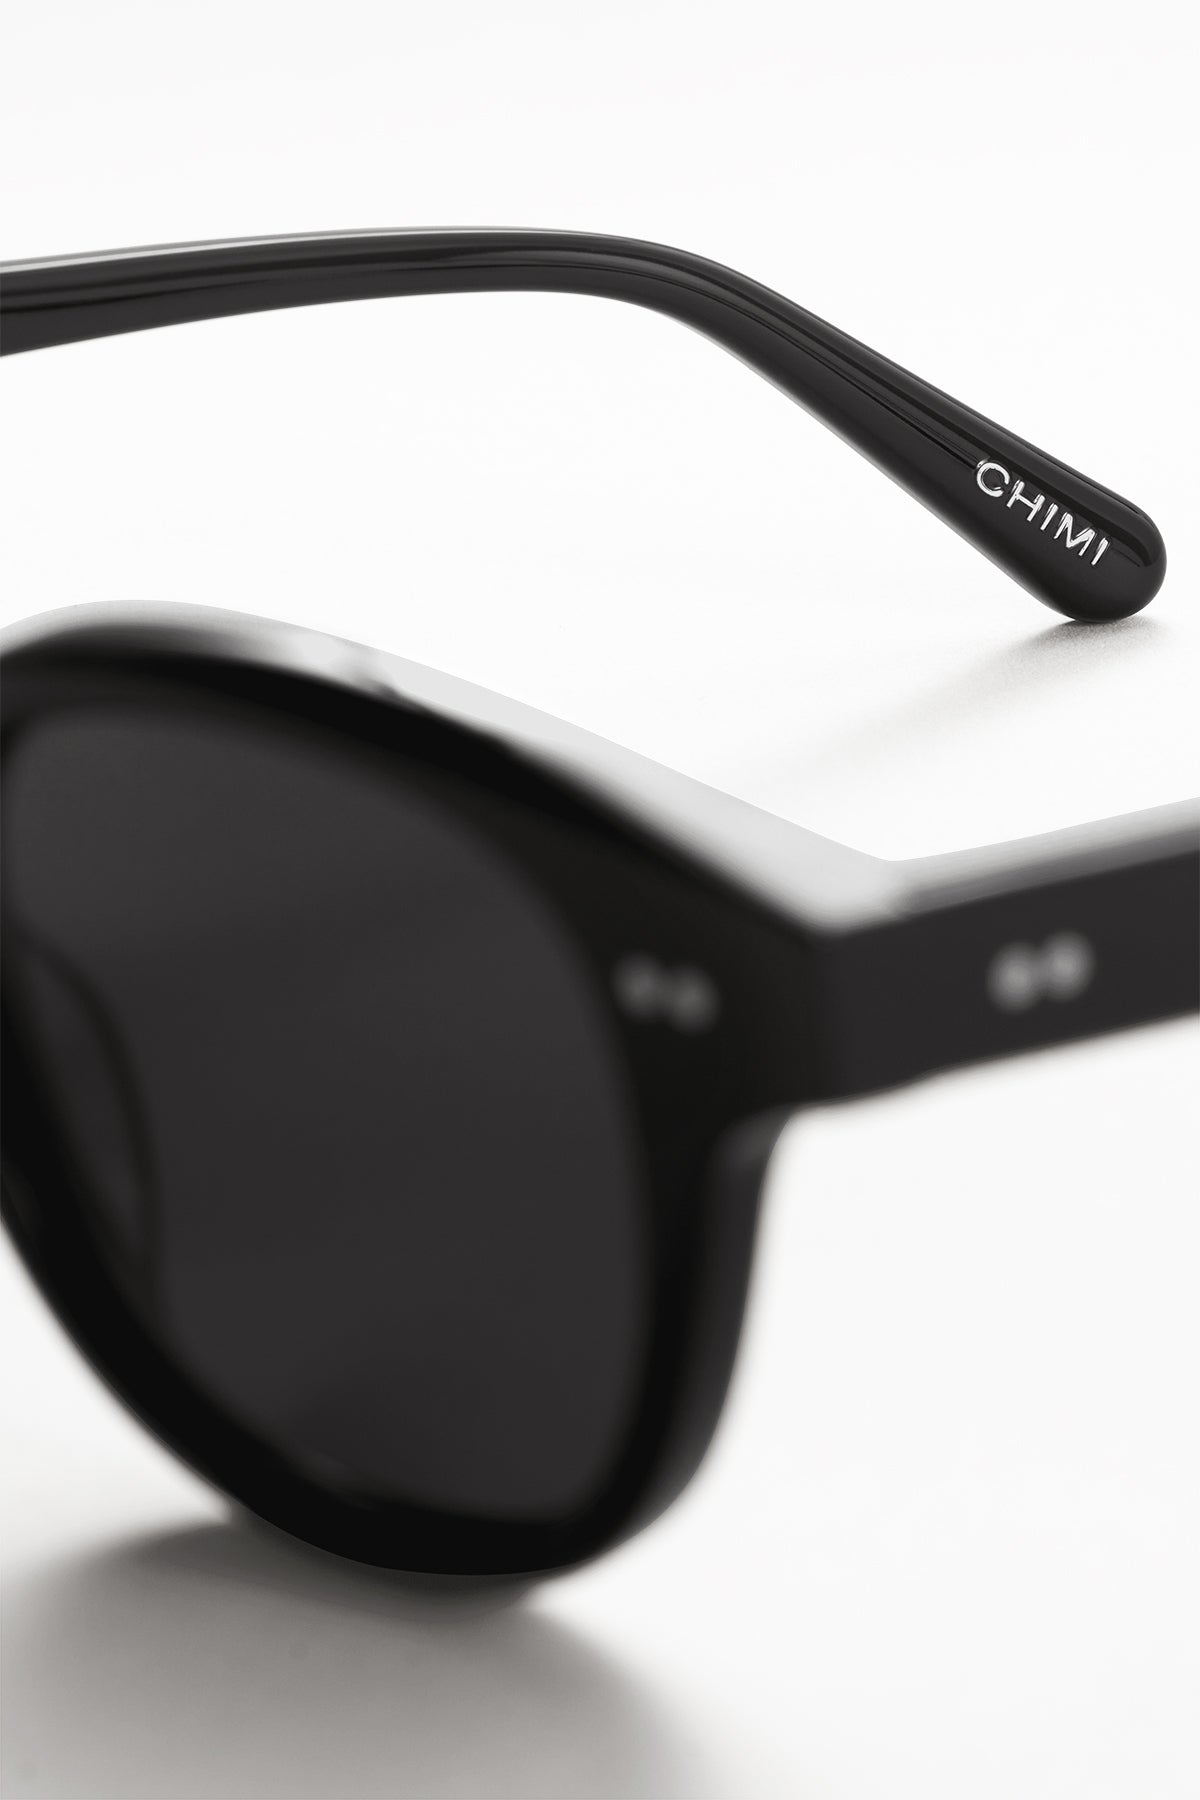 01 SUNGLASSES BY CHIMI by Spencer